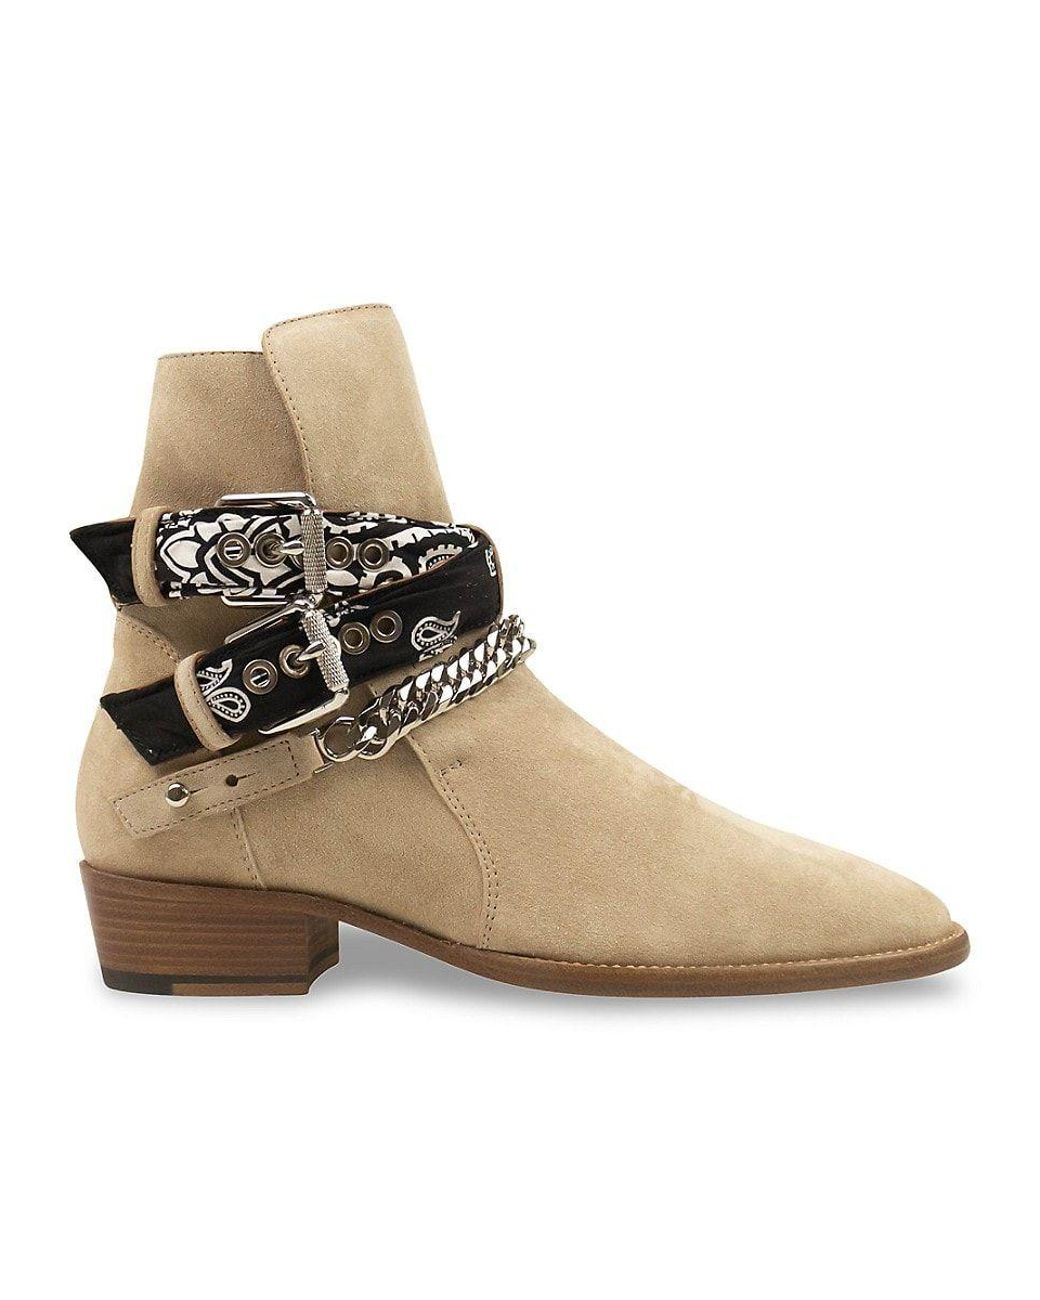 Amiri Belted Suede Ankle Boots in Natural | Lyst